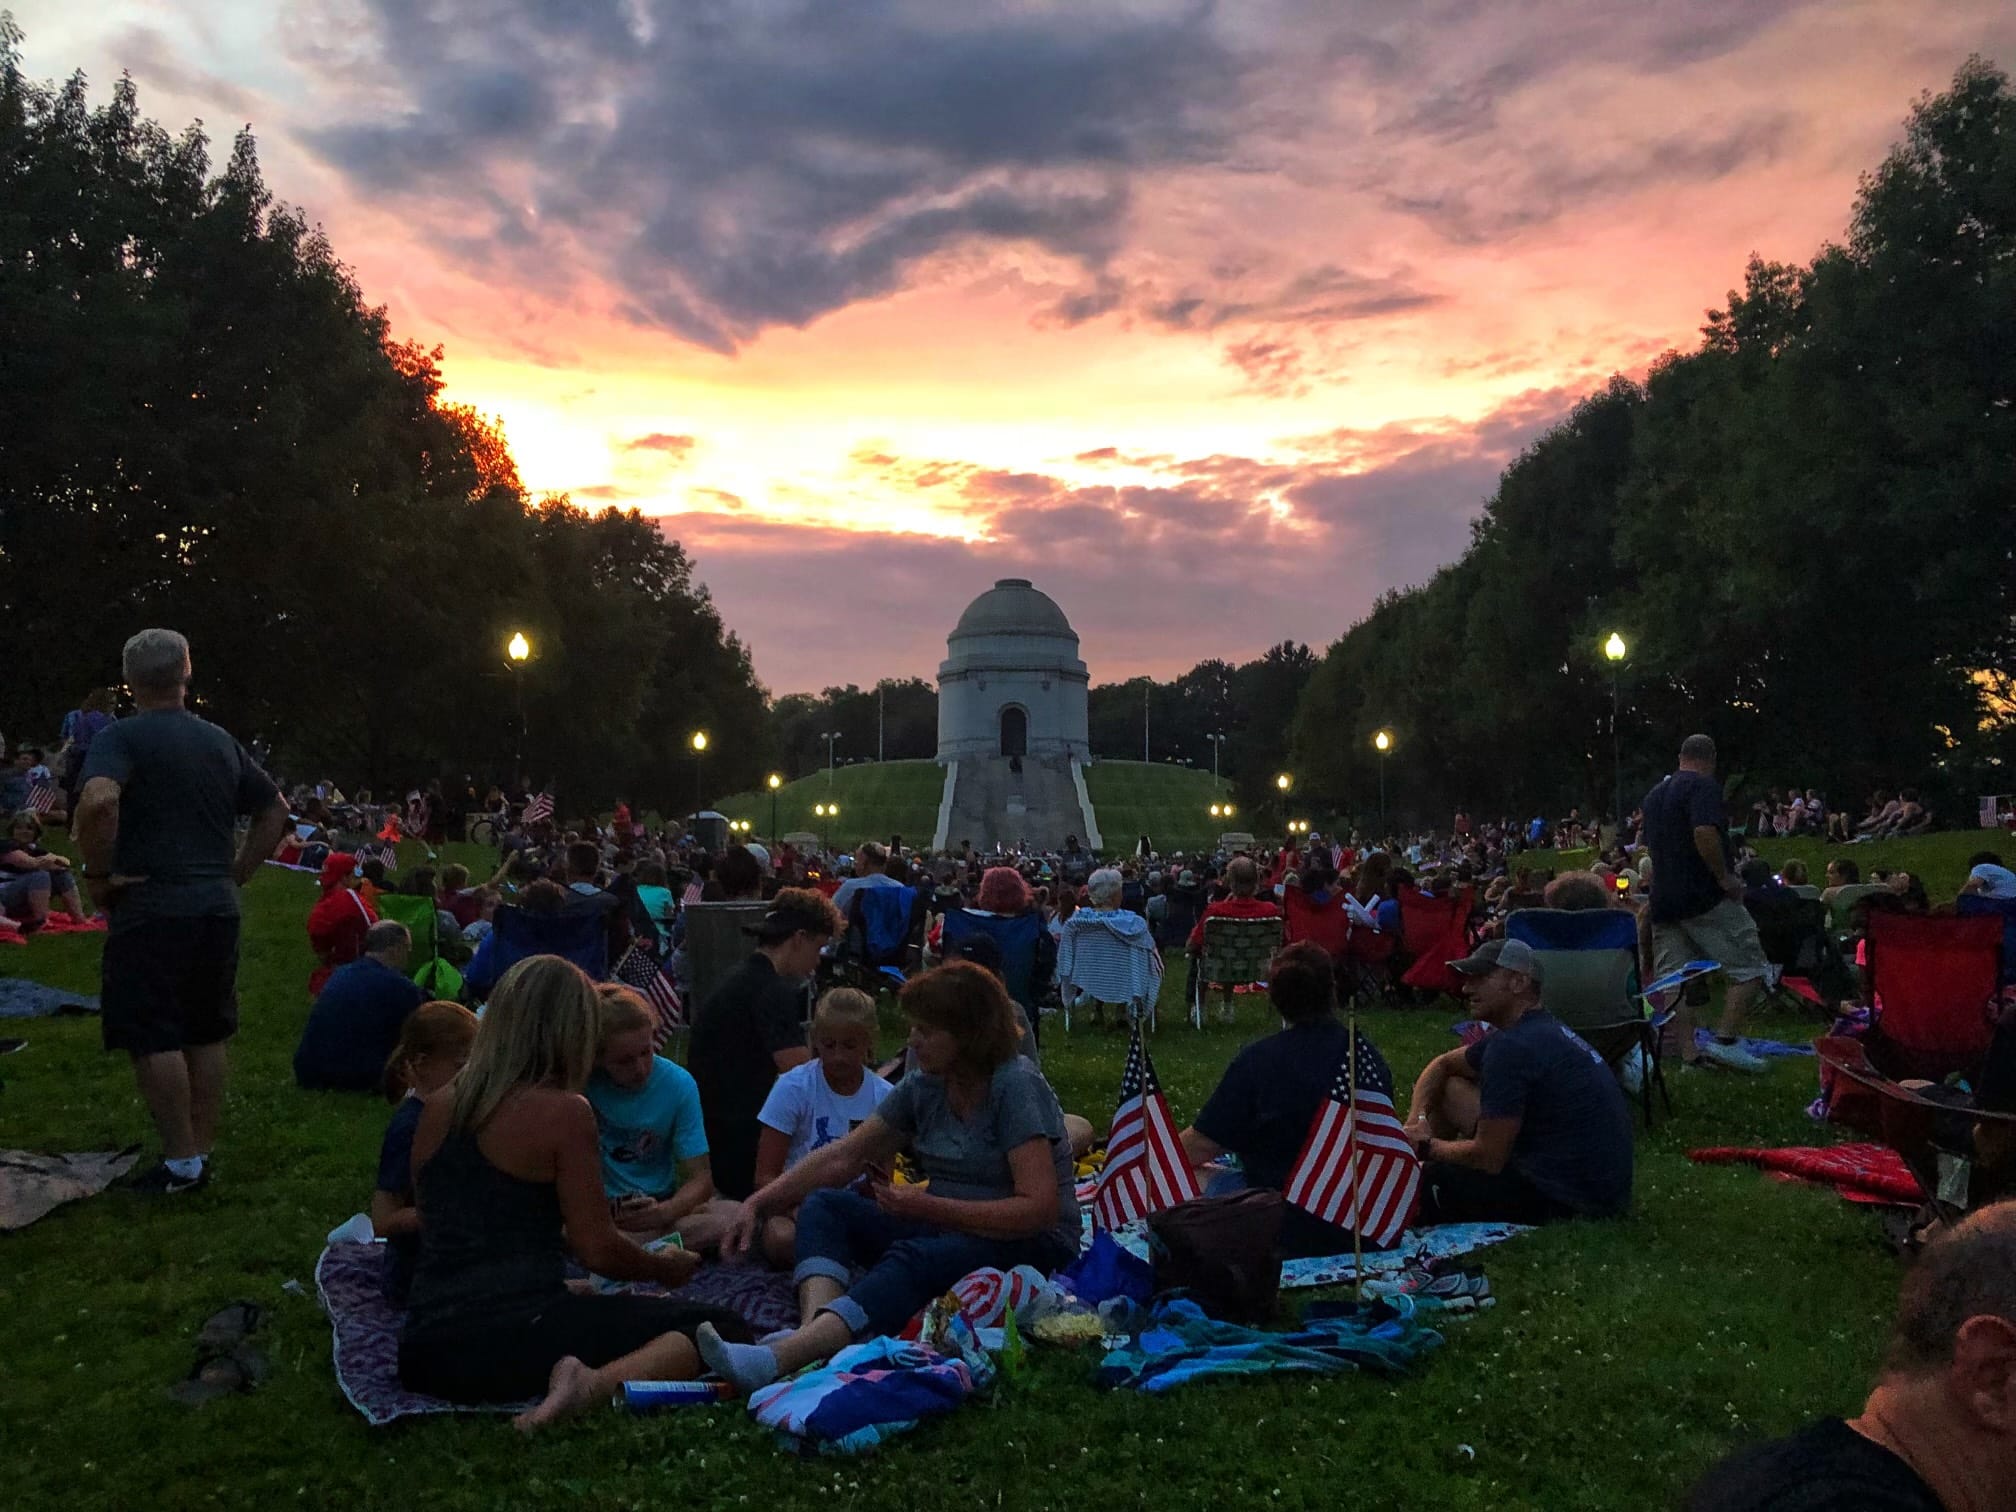 Iconic shot of the park in Canton Ohio at sunset with people picnicking in the grass